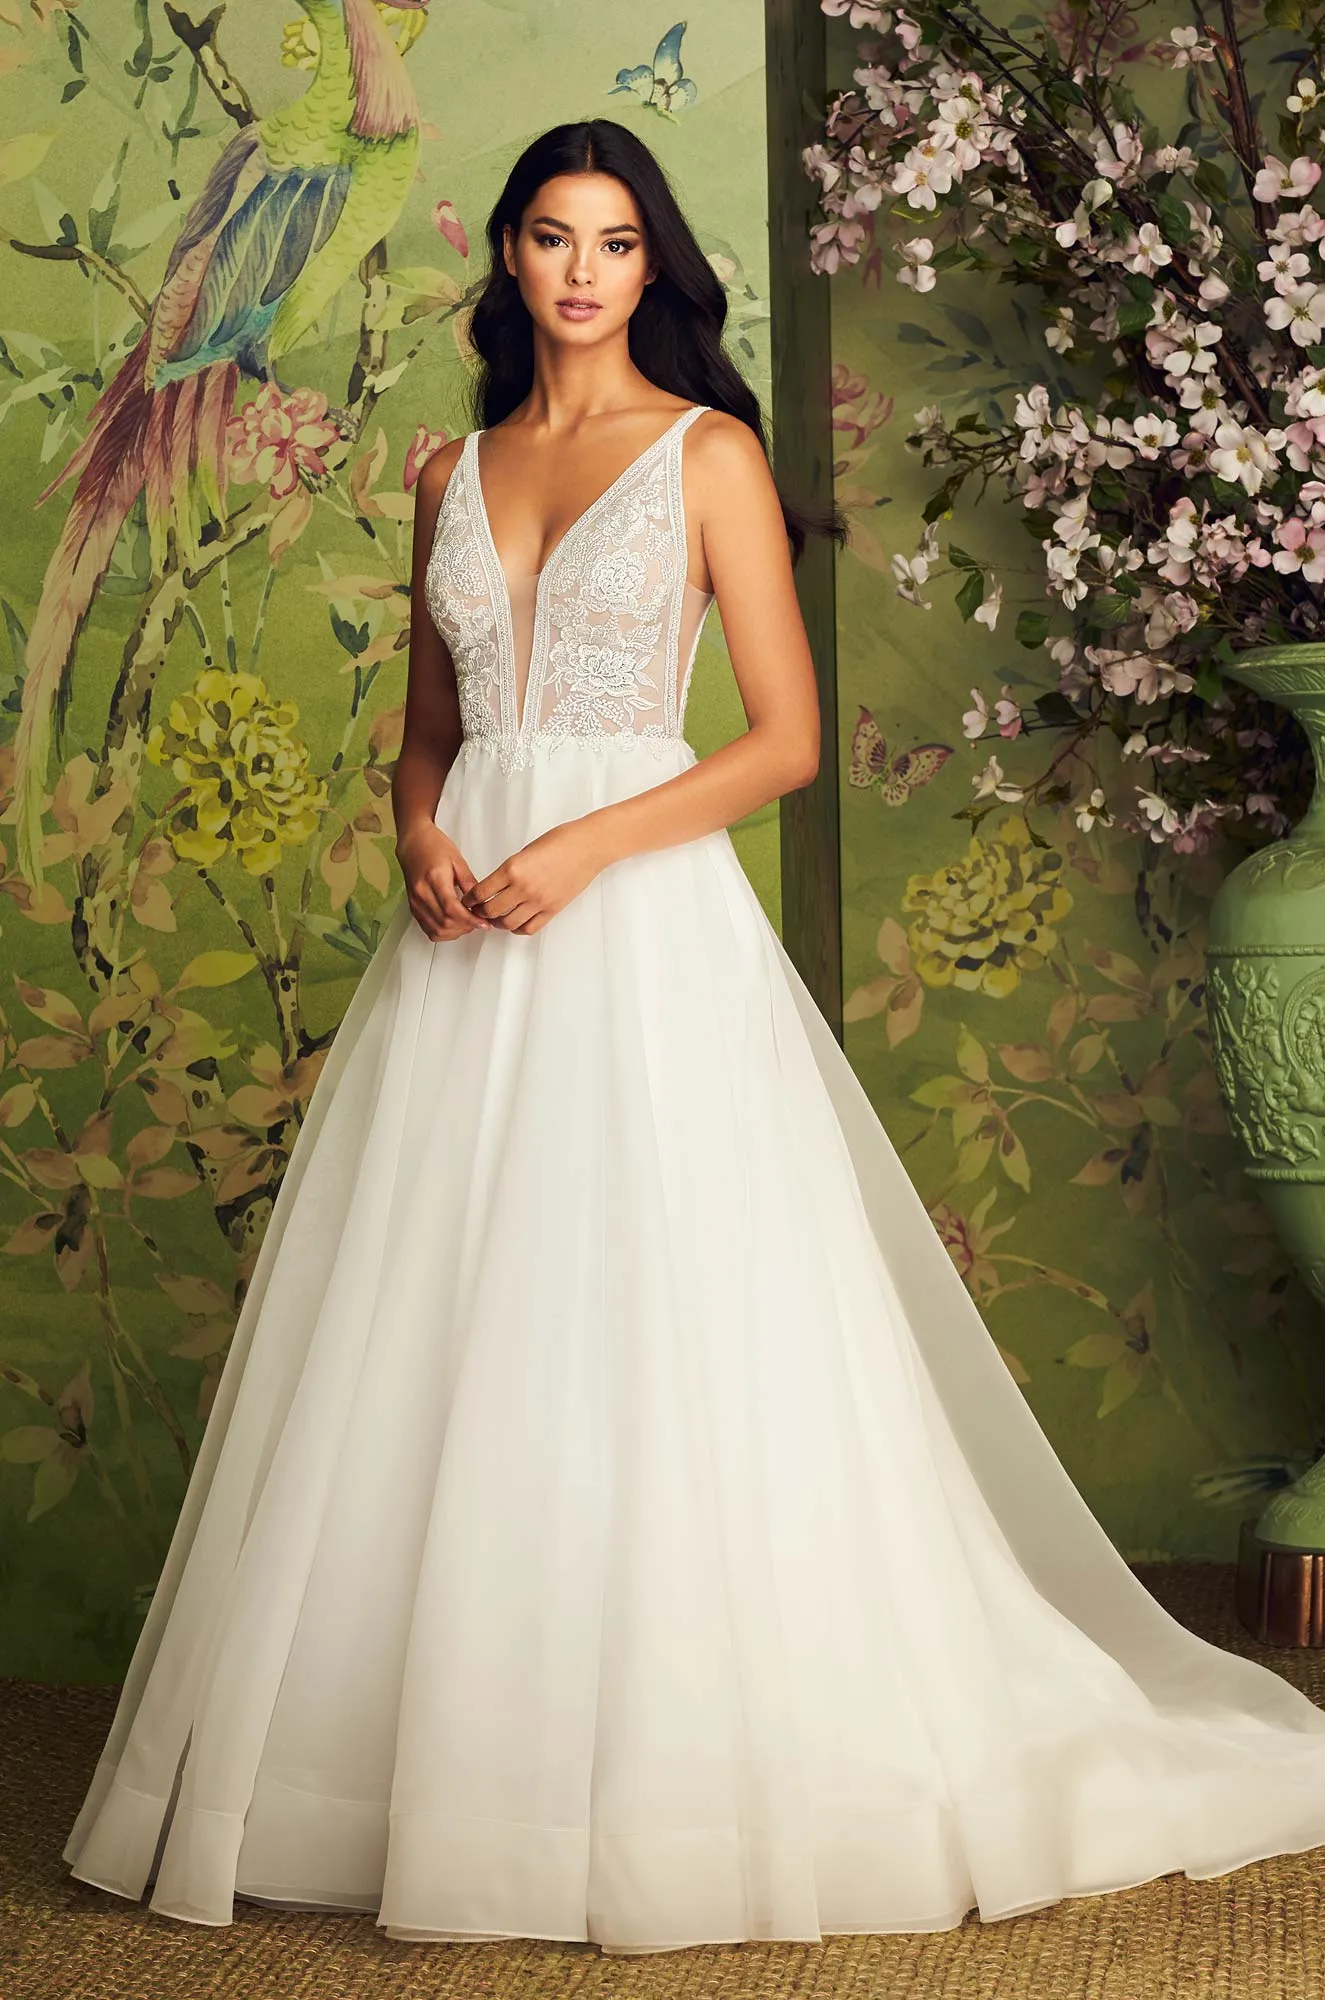 Buying A Wedding Gown For Your Body Shape: Pear